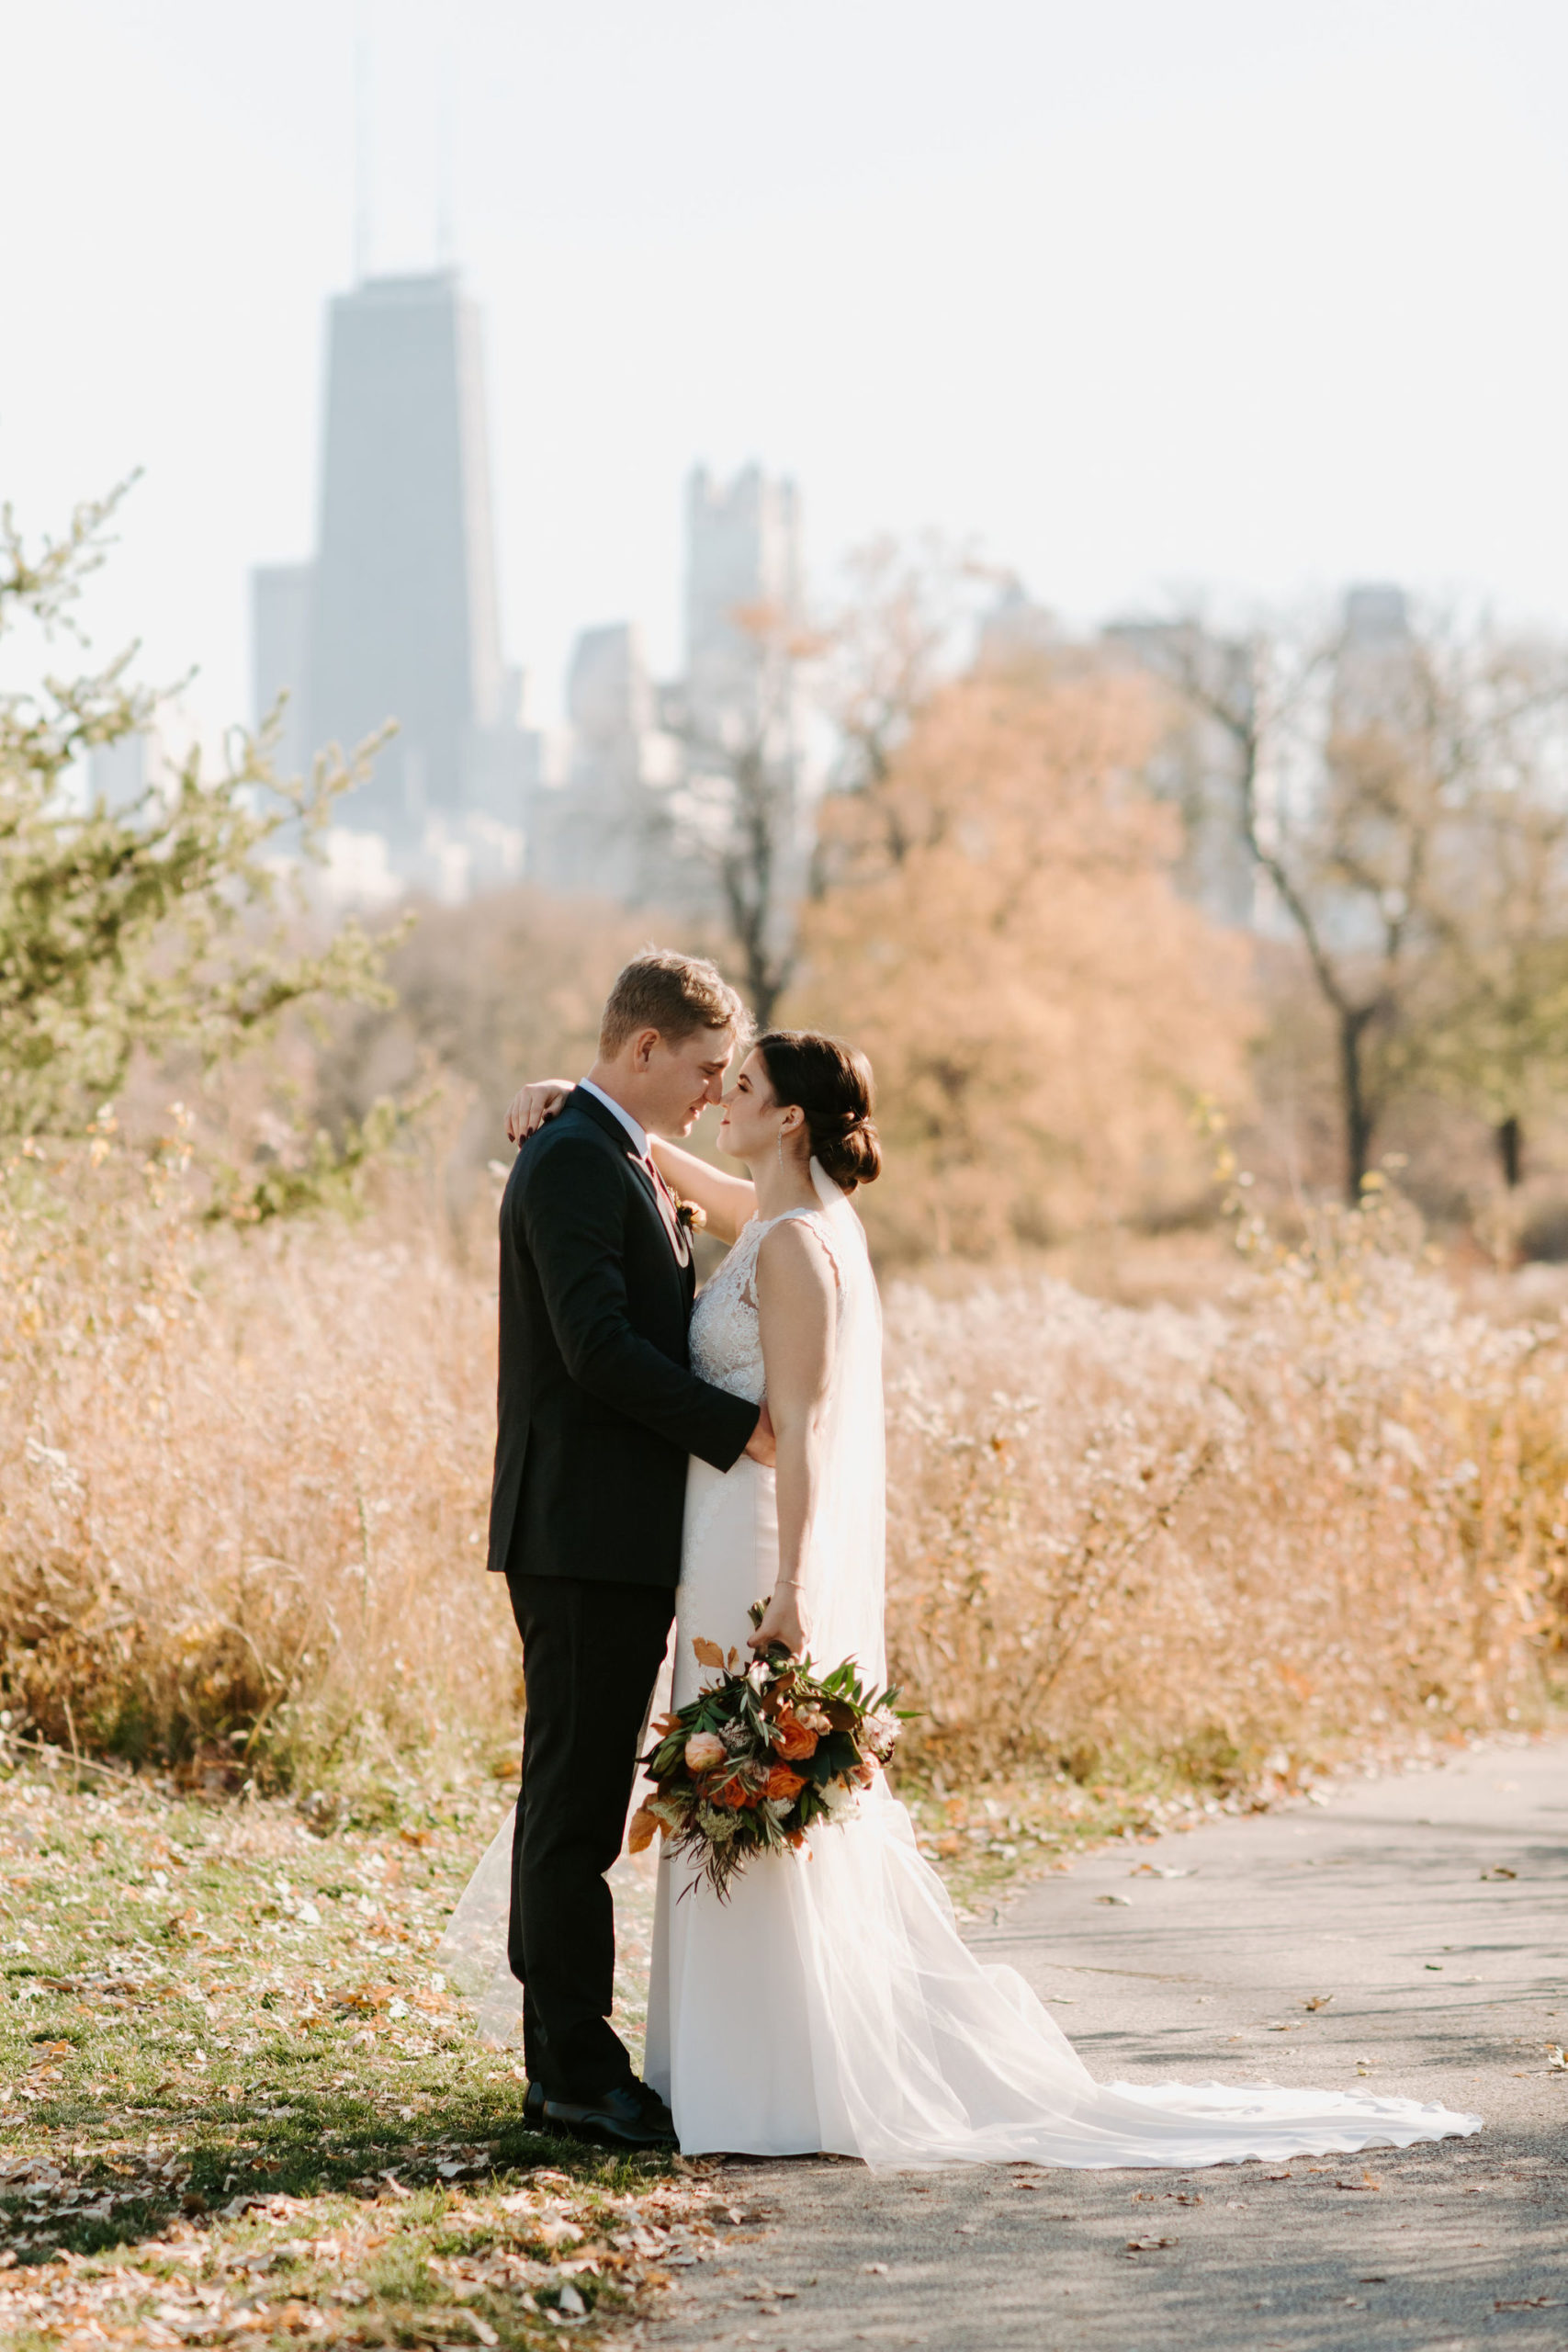 Lincoln Park Wedding & A Backyard Reception | Photographs by Teresa. This blog post includes wedding details, bridal fashion, groom fashion, bride and groom portraits. Book your wedding and browse the blog for more inspiration